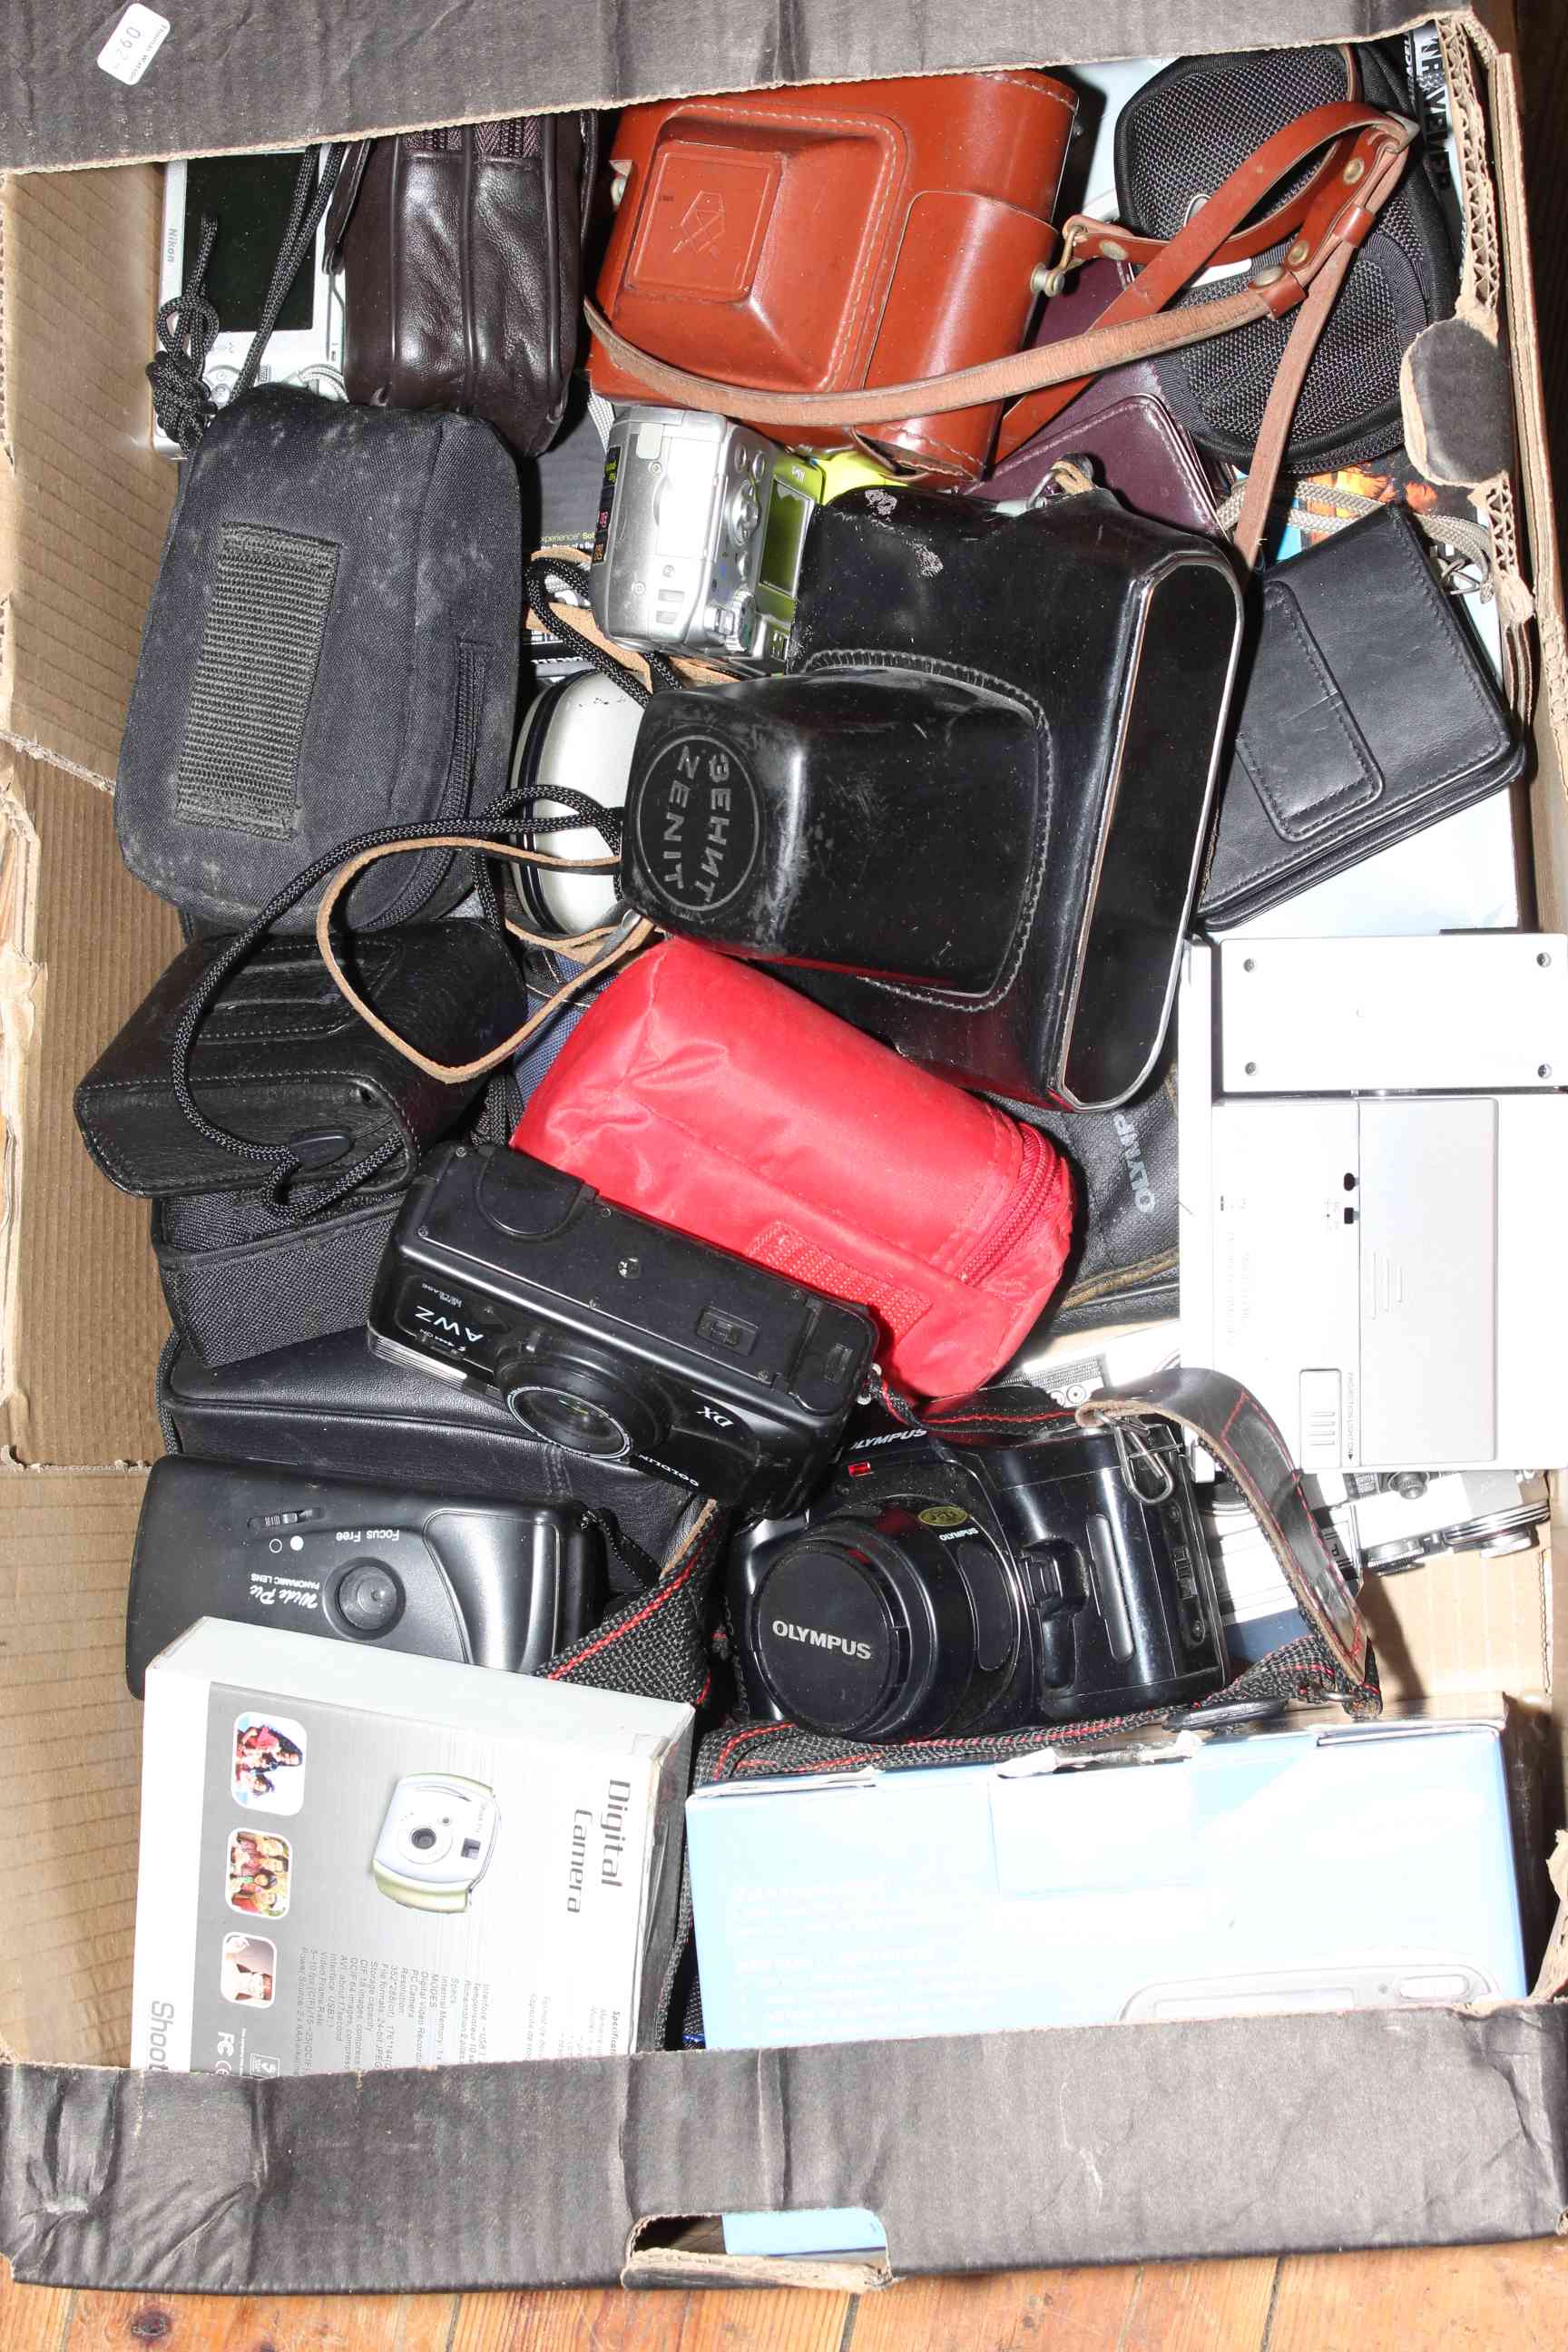 Collection of cameras and binoculars. - Image 2 of 2